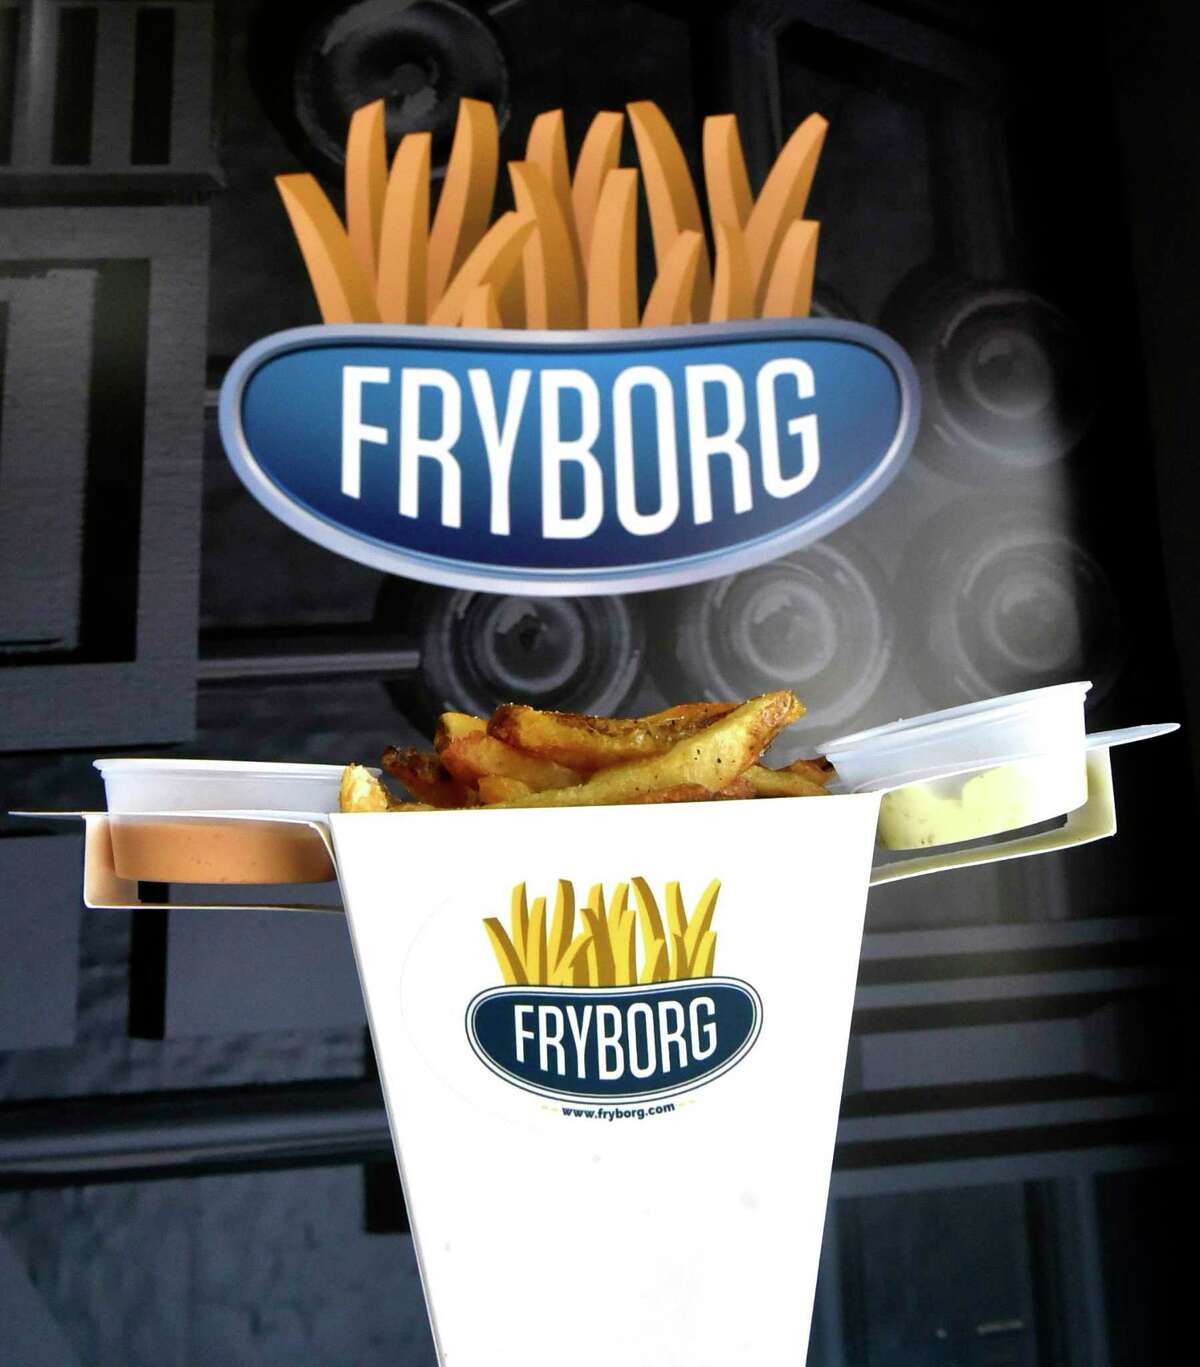 Fryborg, a Milford-based resident perhaps best known for its hand-cut fries with a choice of more than 15 dipping sauces and an array of toppings, will open a branch in Trumbull some time in 2022.